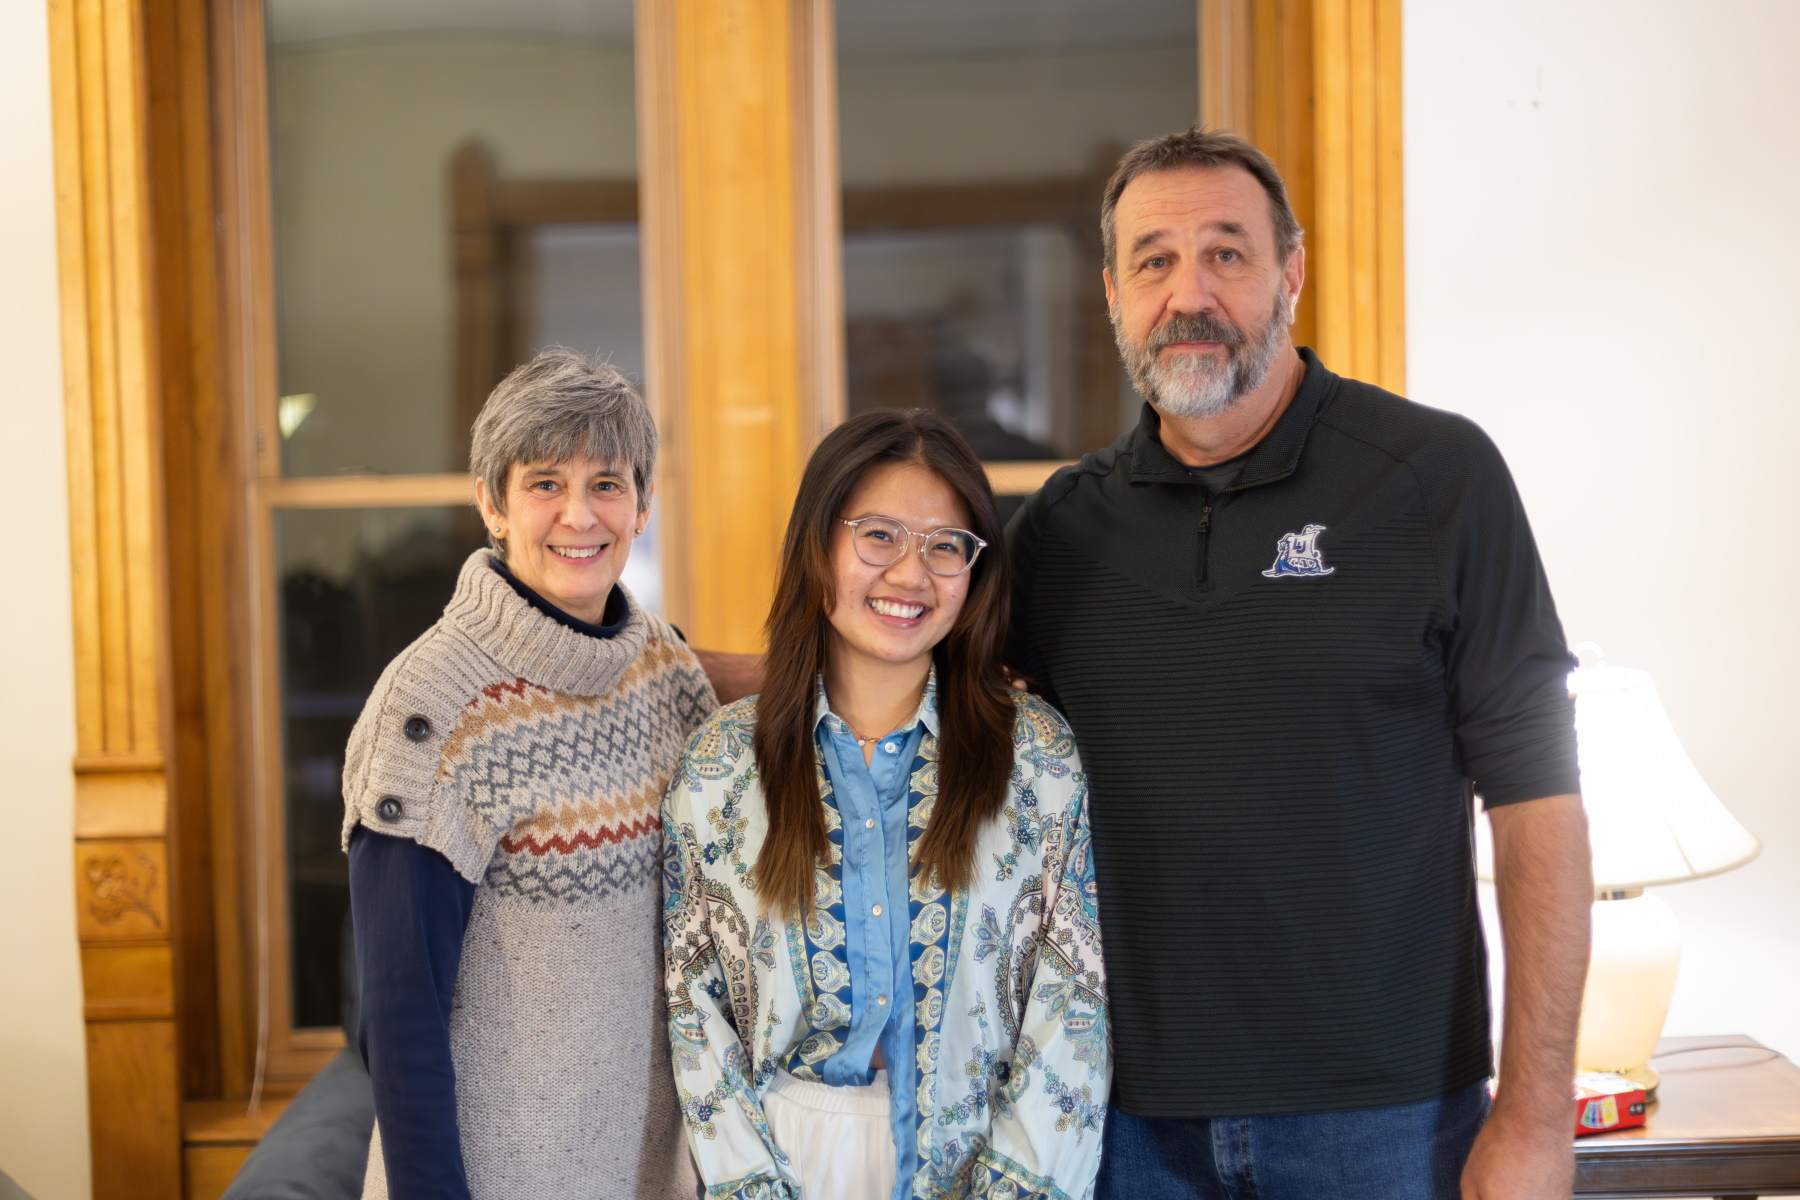 Jill and Paul Wilke pose for a photo with Charlotte Ho, a student from Vietnam.